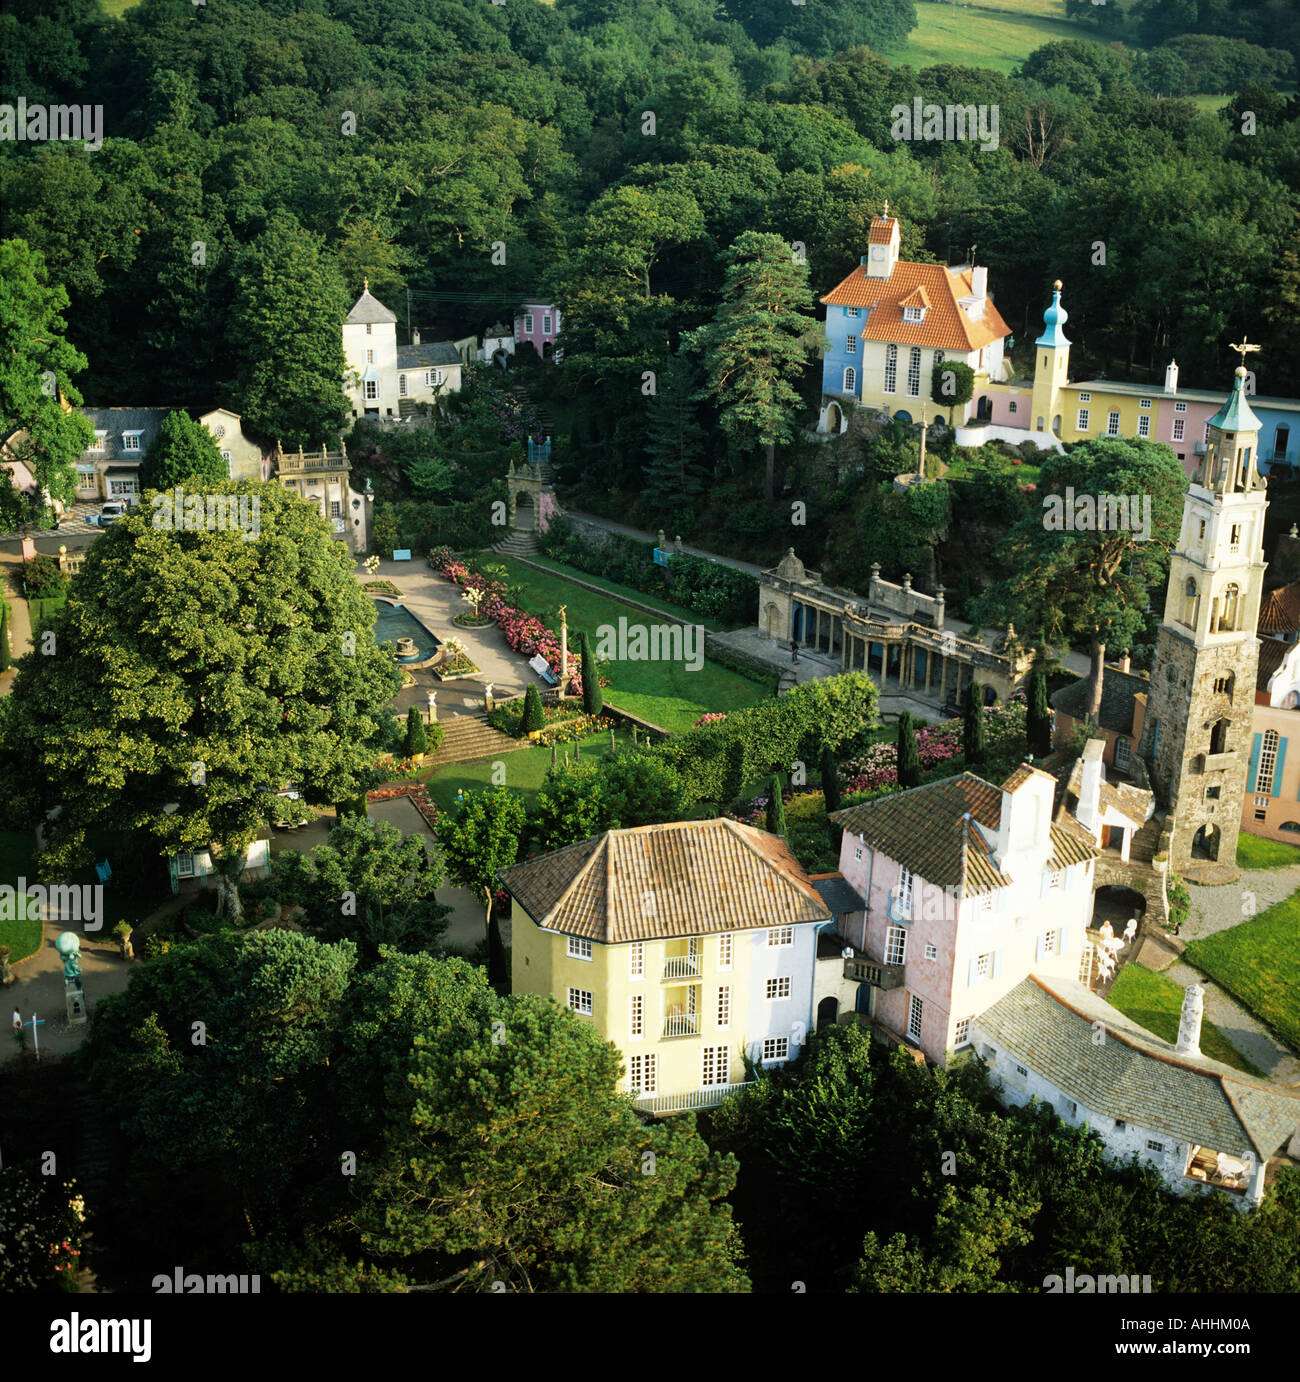 Portmeirion Italianate village Gwynedd Wales built by William Clough Ellis famous for The Prisoner TV series aerial view Stock Photo